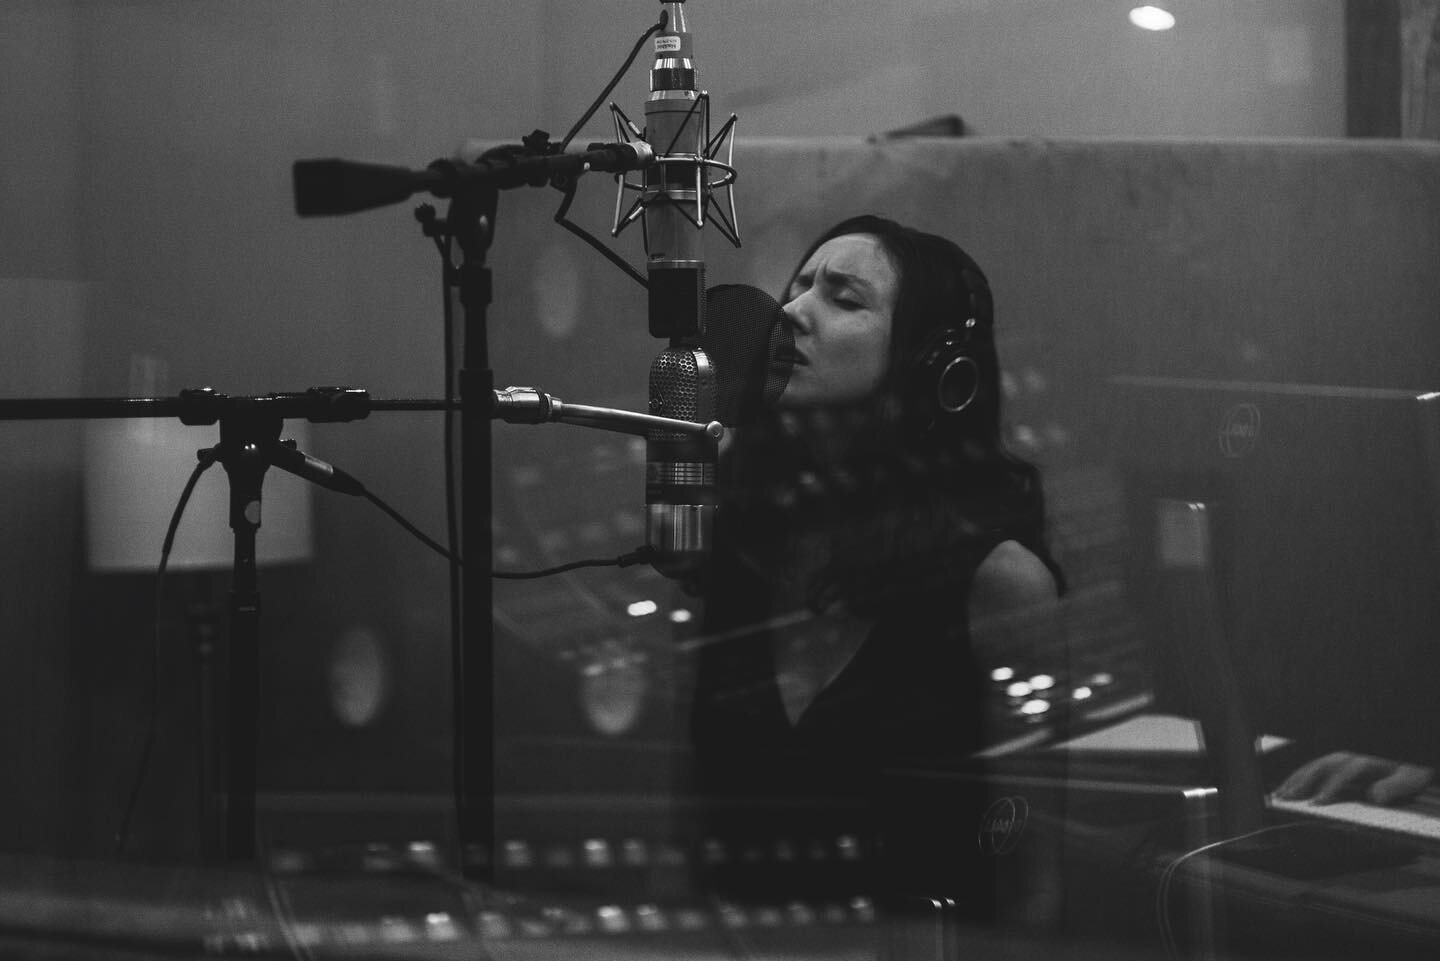 The process of making Black Cloud was so enlightening. I had to be very patient with myself as a first-time producer and exploring sounds and moods I&rsquo;d never played with before. Here I am at @theblackbirdstudio recording vocals with @stargel90 